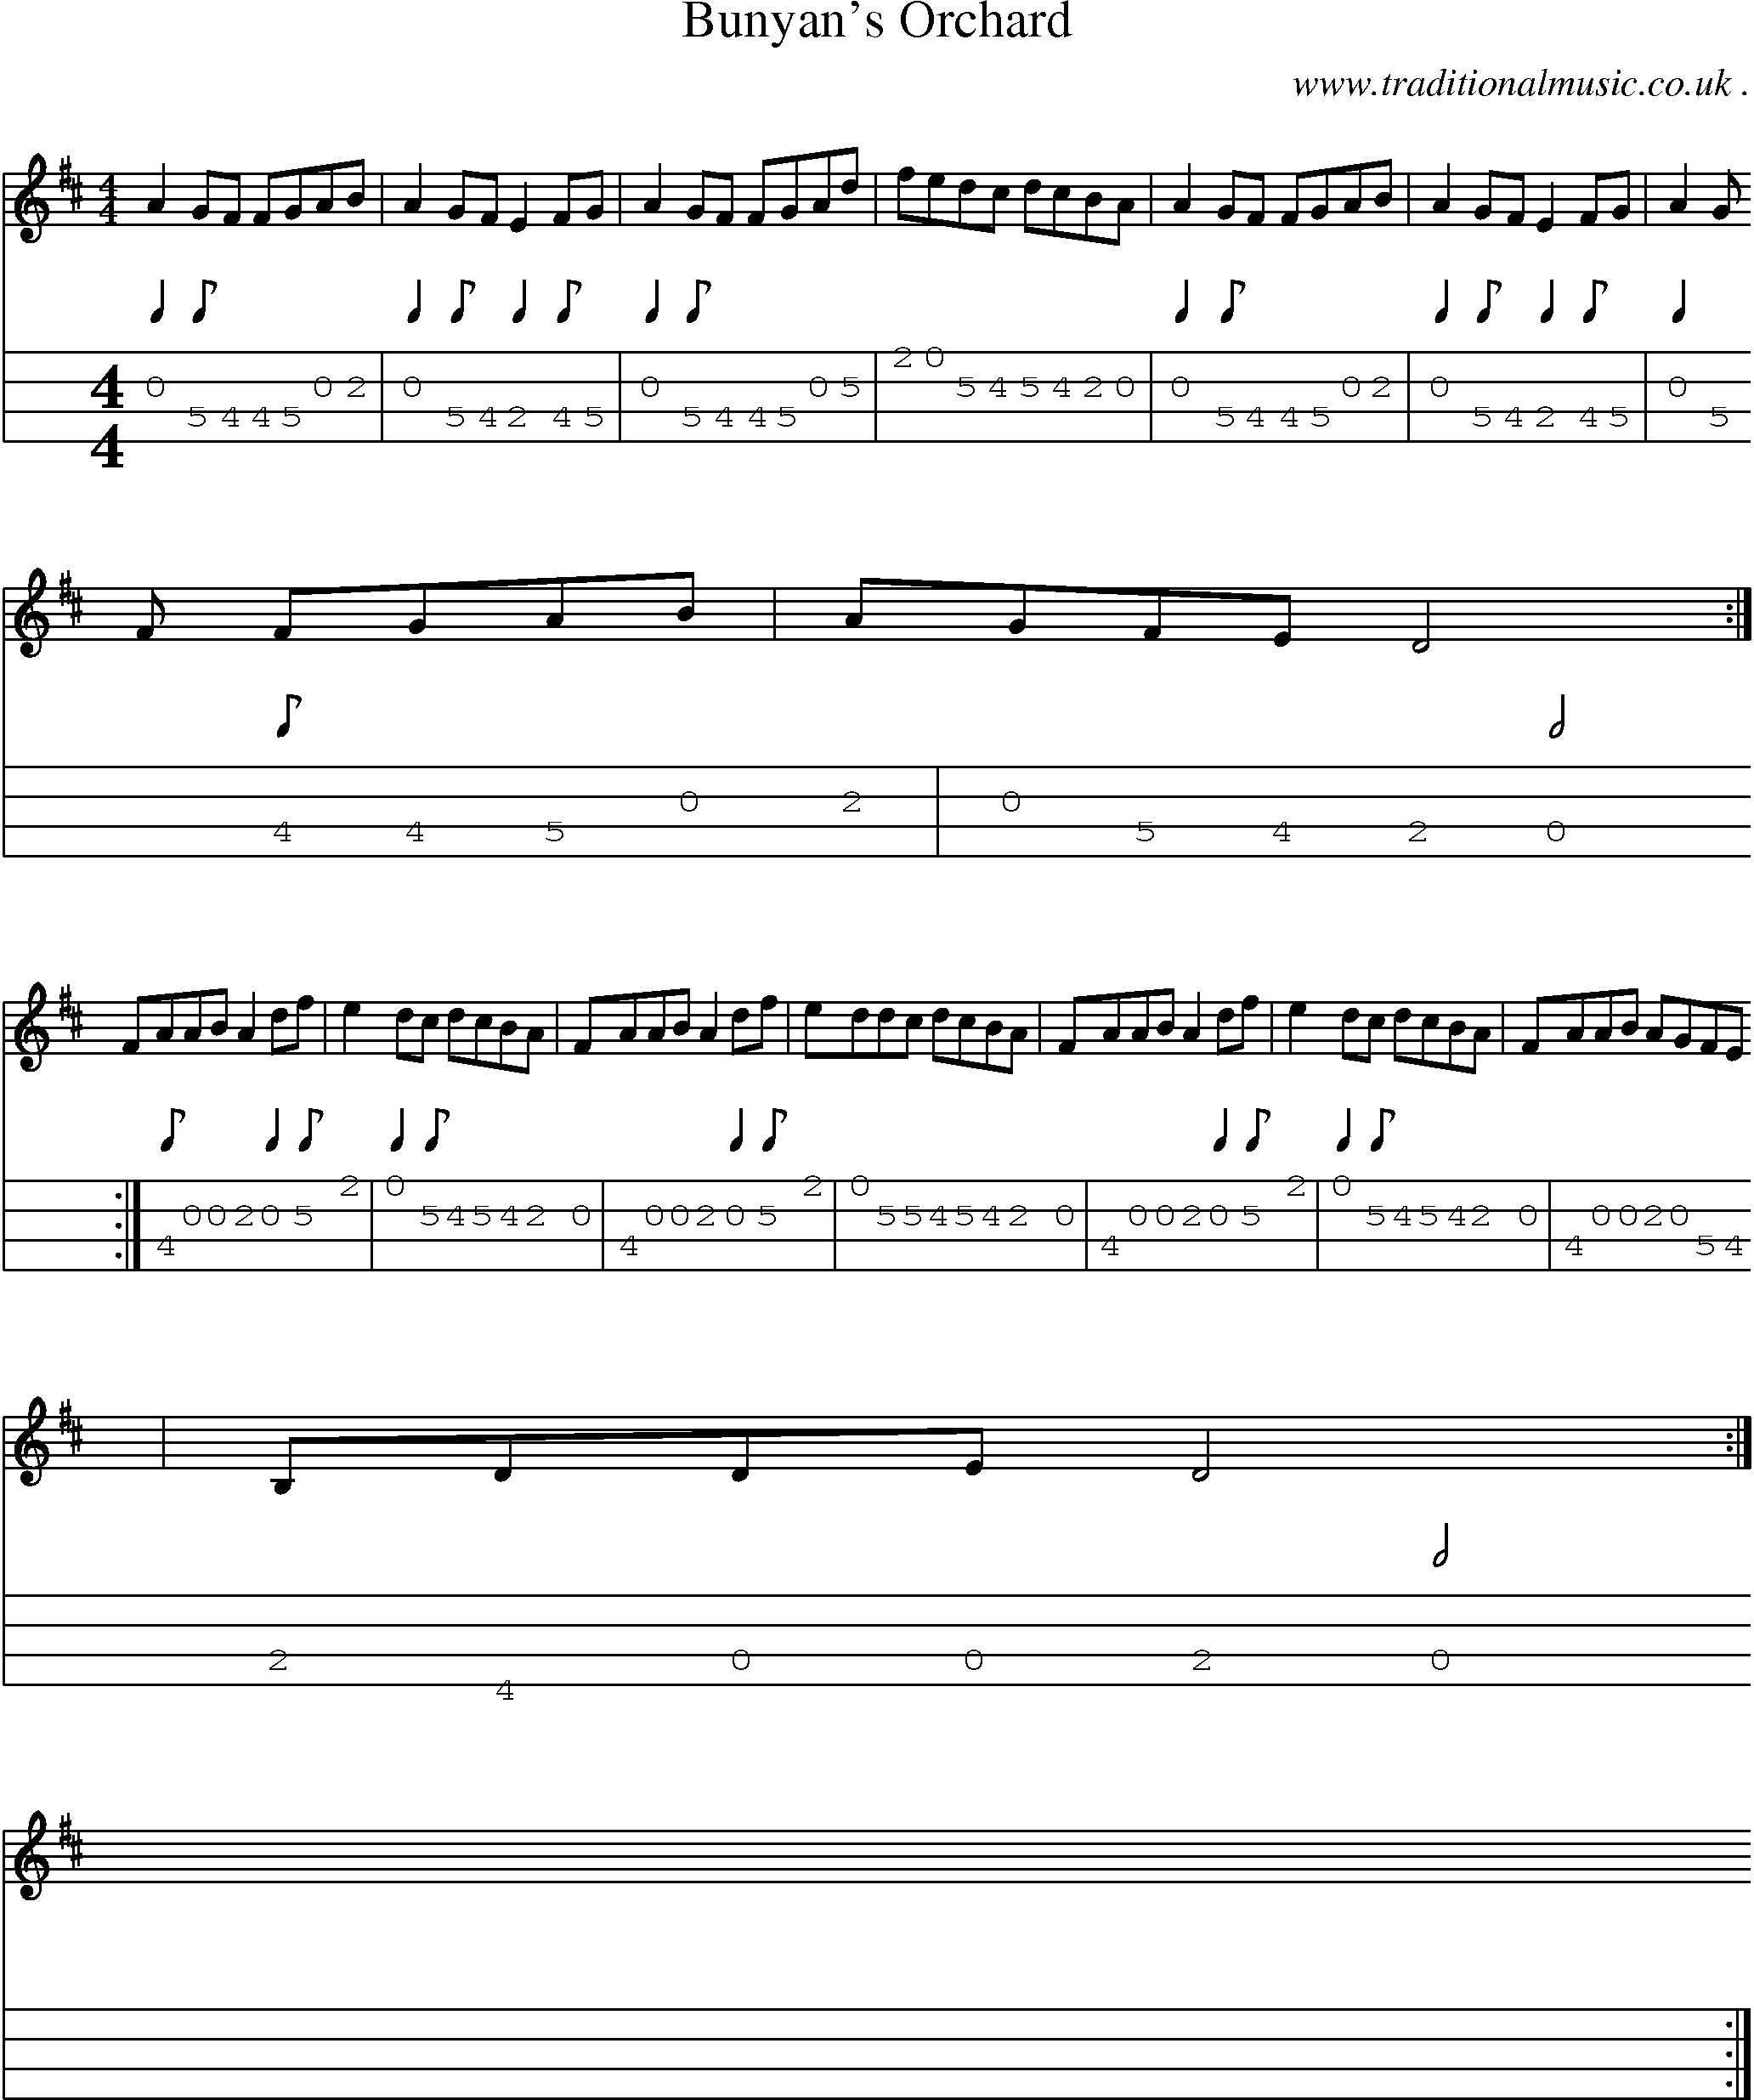 Sheet-Music and Mandolin Tabs for Bunyans Orchard